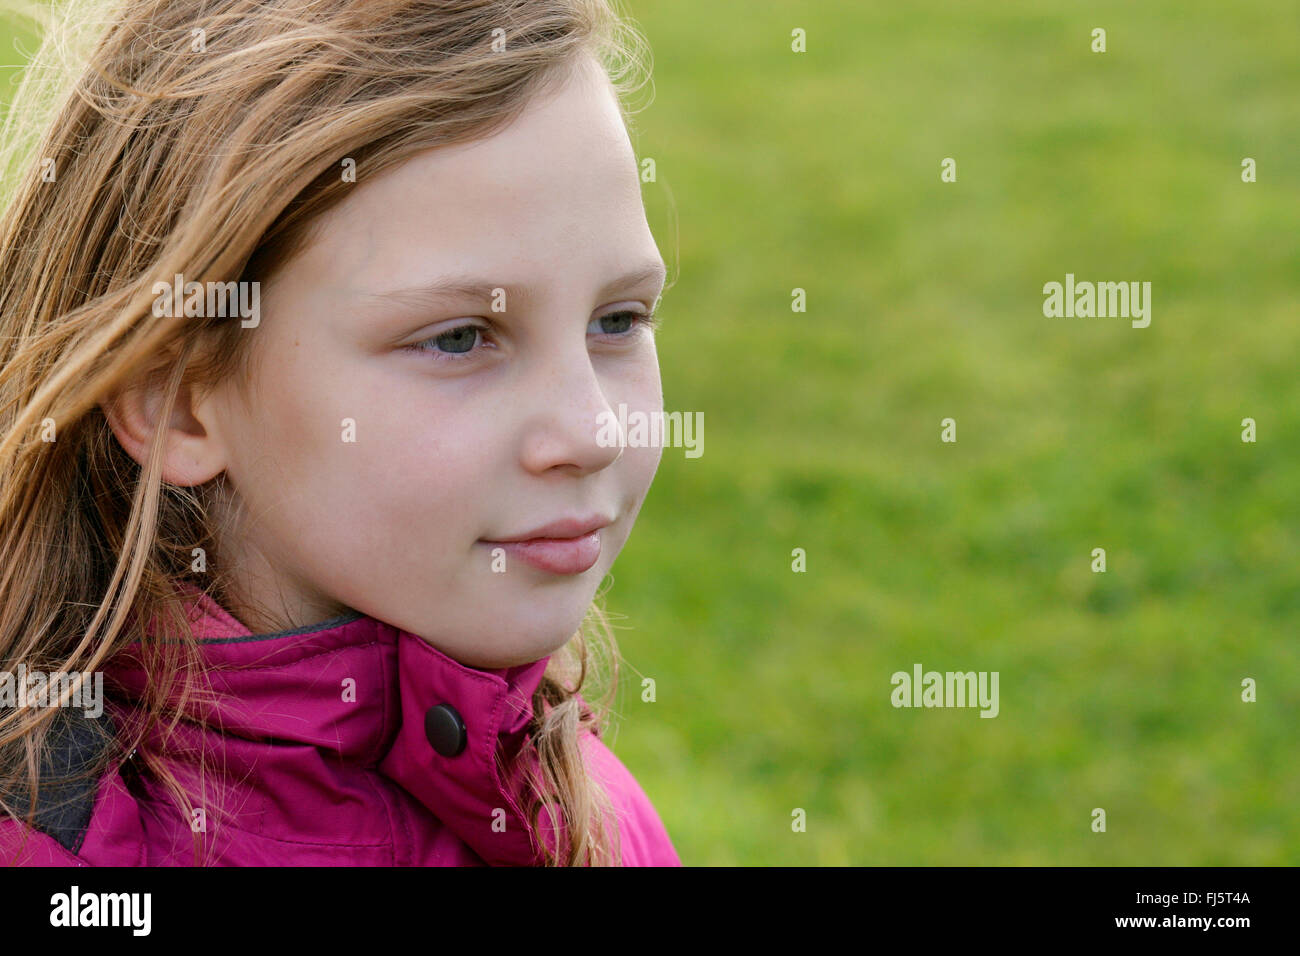 8 years old girl, portrait, Germany Stock Photo